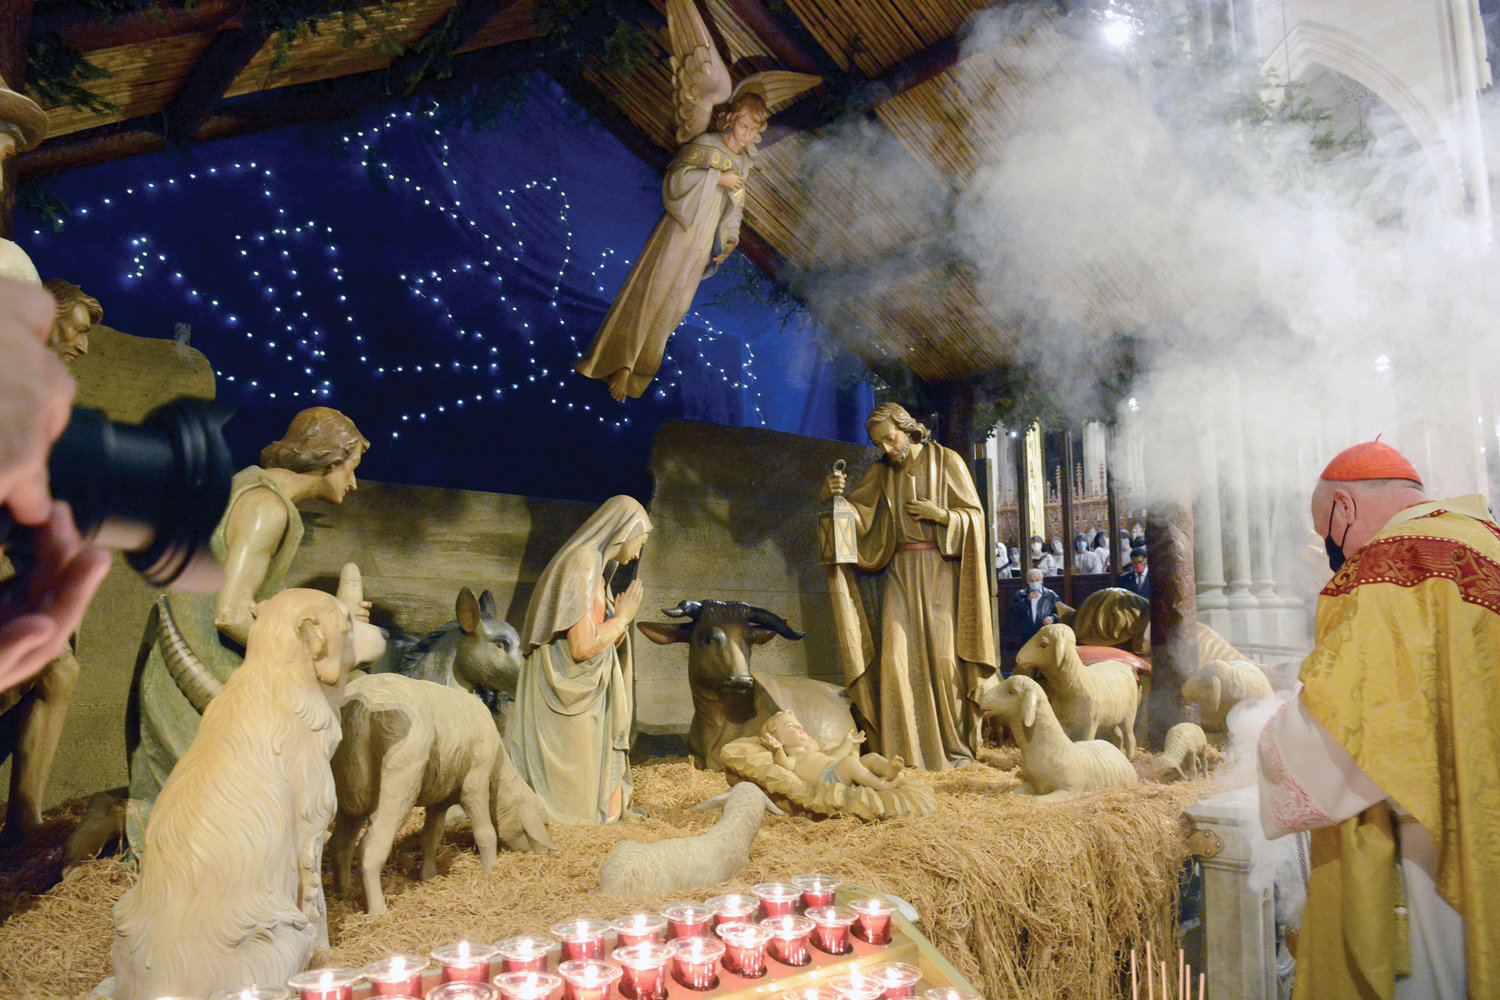 A SAVIOR IS BORN—At Christmas Midnight Mass in St. Patrick’s Cathedral, Cardinal Dolan kneels in prayer before the creche as incense wafts upward. With Mary and Joseph close by, the infant Jesus is also surrounded by animals in the serene depiction.